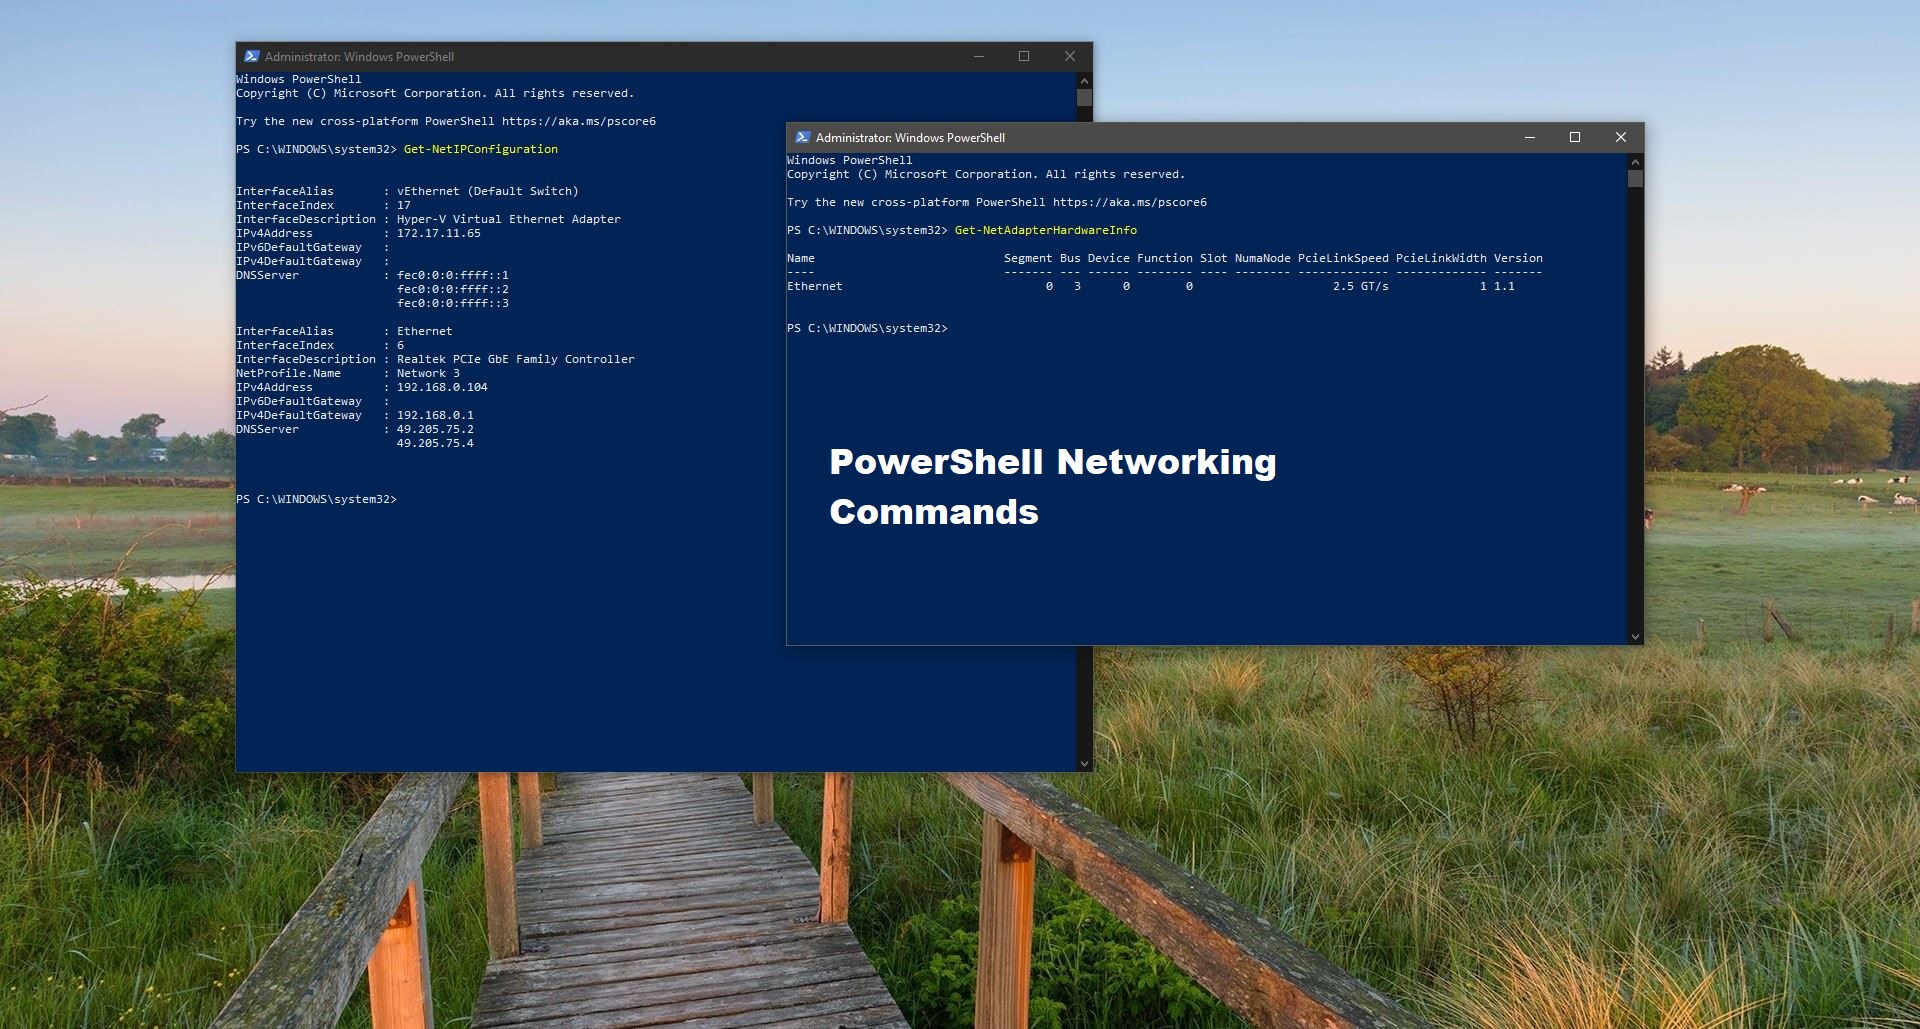 Basic PowerShell Networking Commands